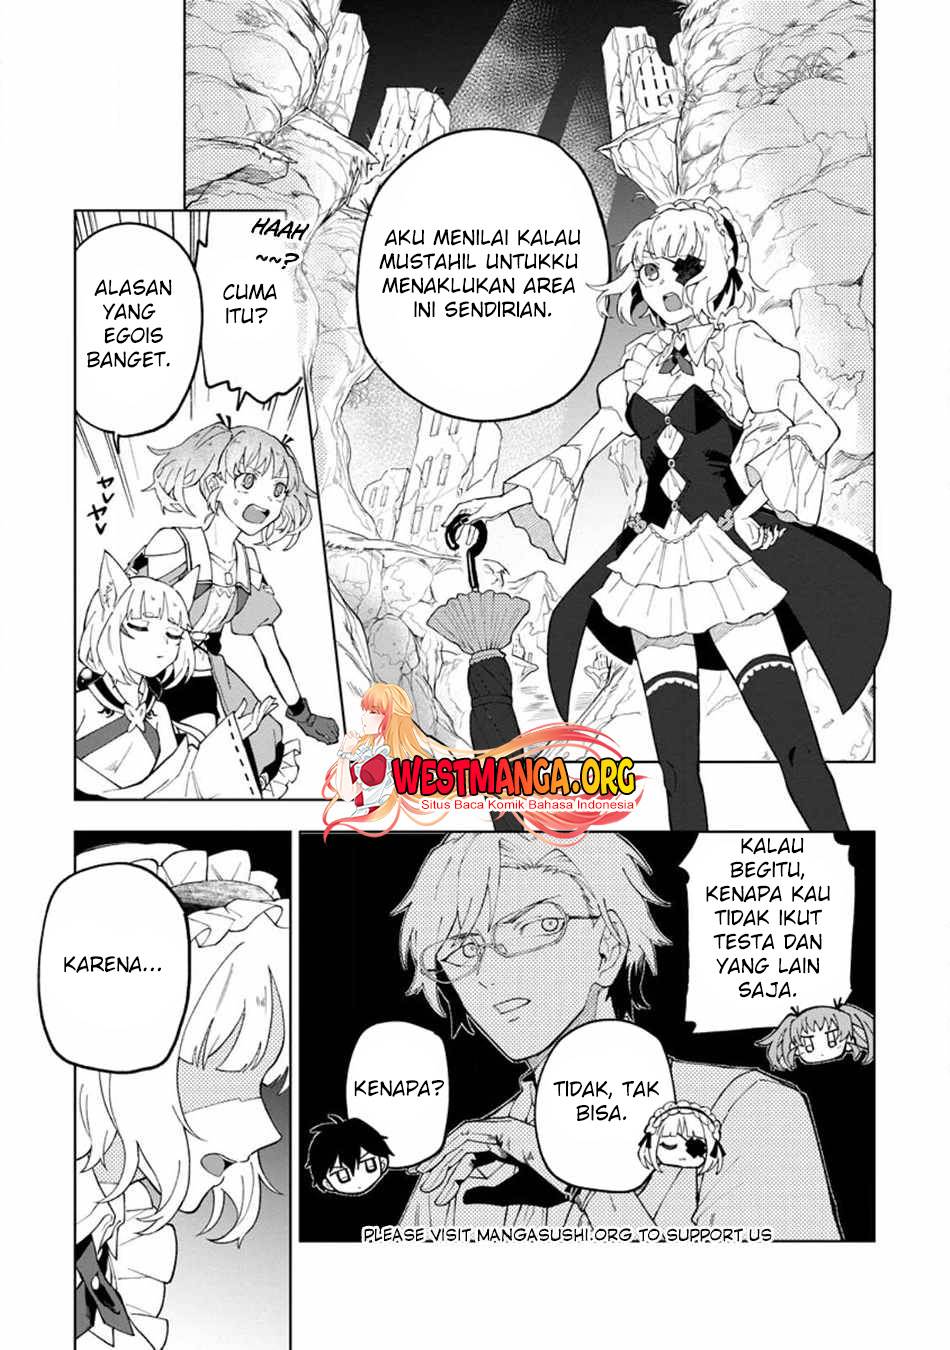 The White Mage Who Was Banished From the Hero’s Party Is Picked up by an S Rank Adventurer ~ This White Mage Is Too Out of the Ordinary! Chapter 25